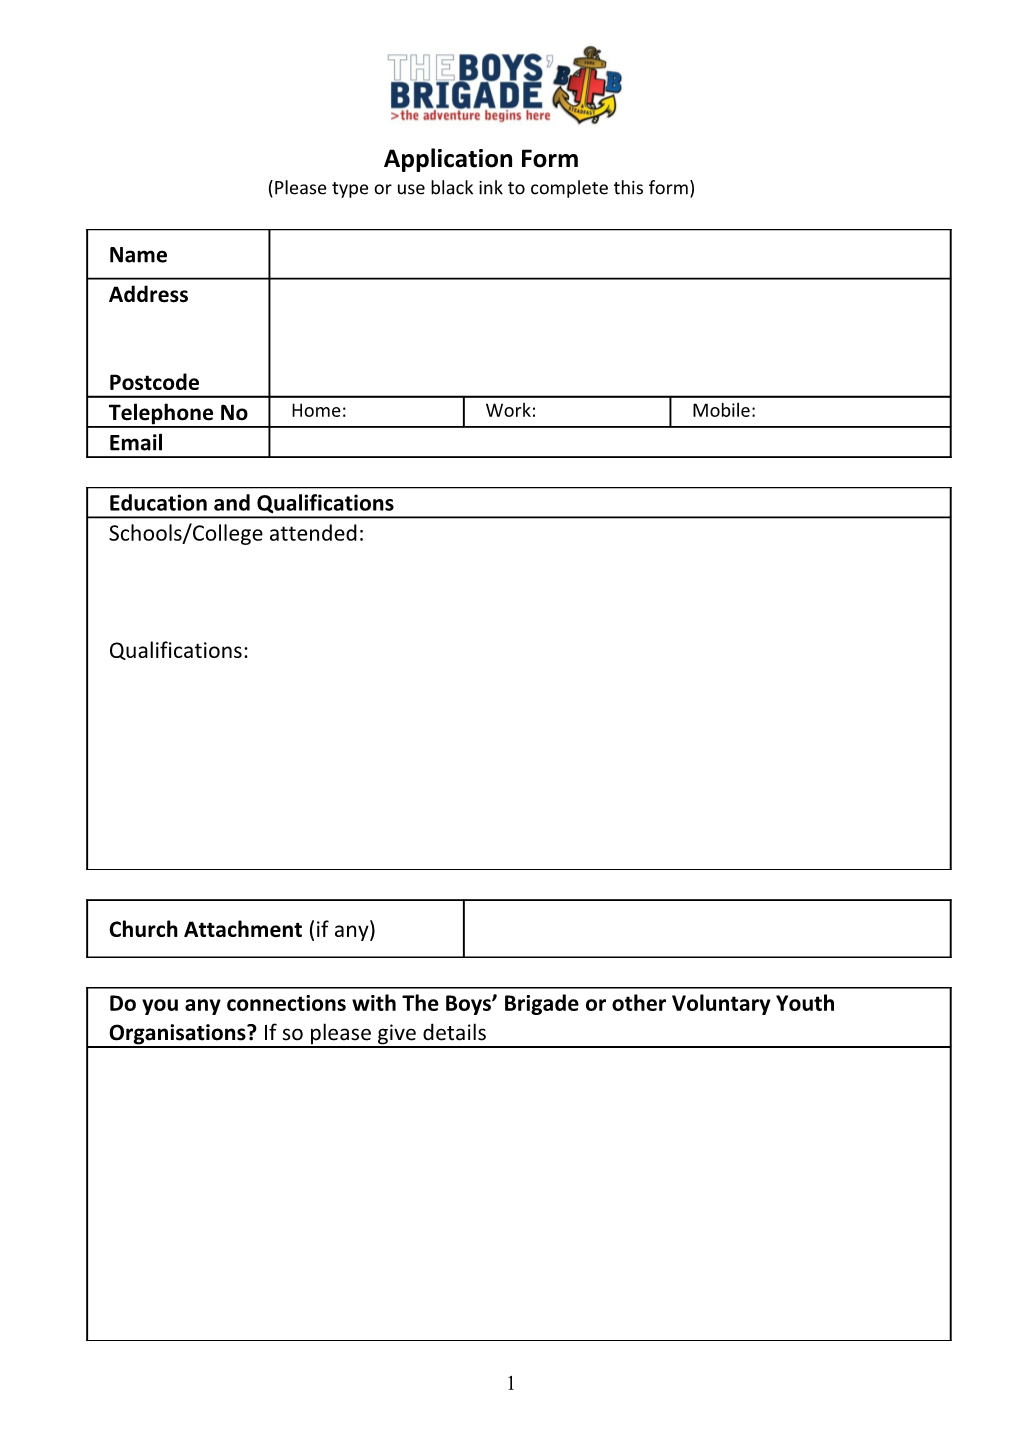 Please Type Or Use Black Ink to Complete This Form